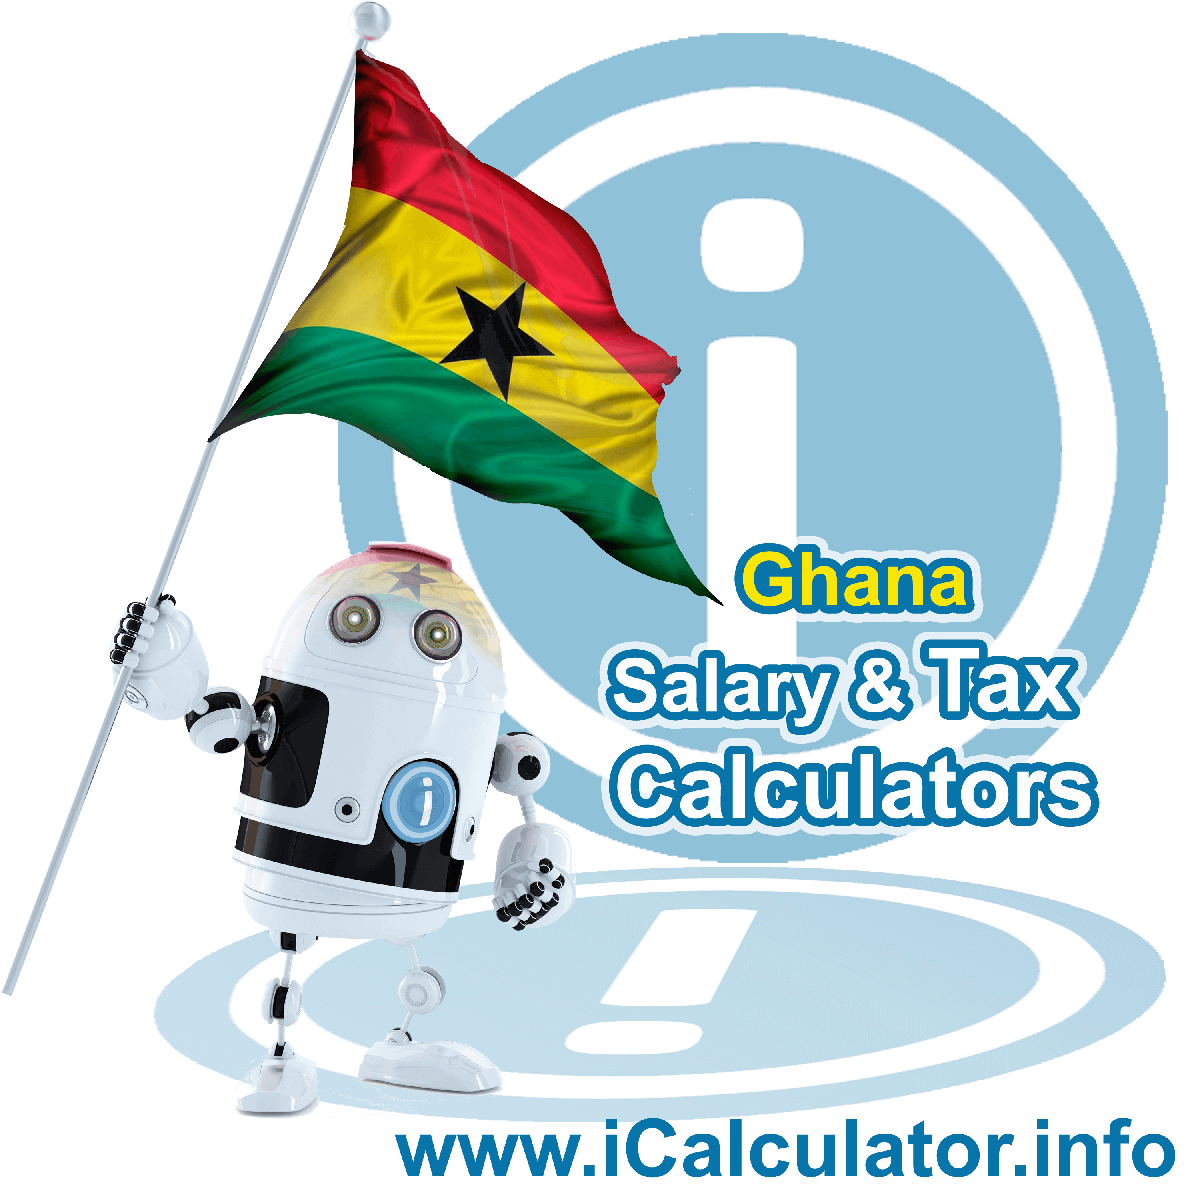 Ghana Wage Calculator. This image shows the Ghana flag and information relating to the tax formula for the Ghana Tax Calculator